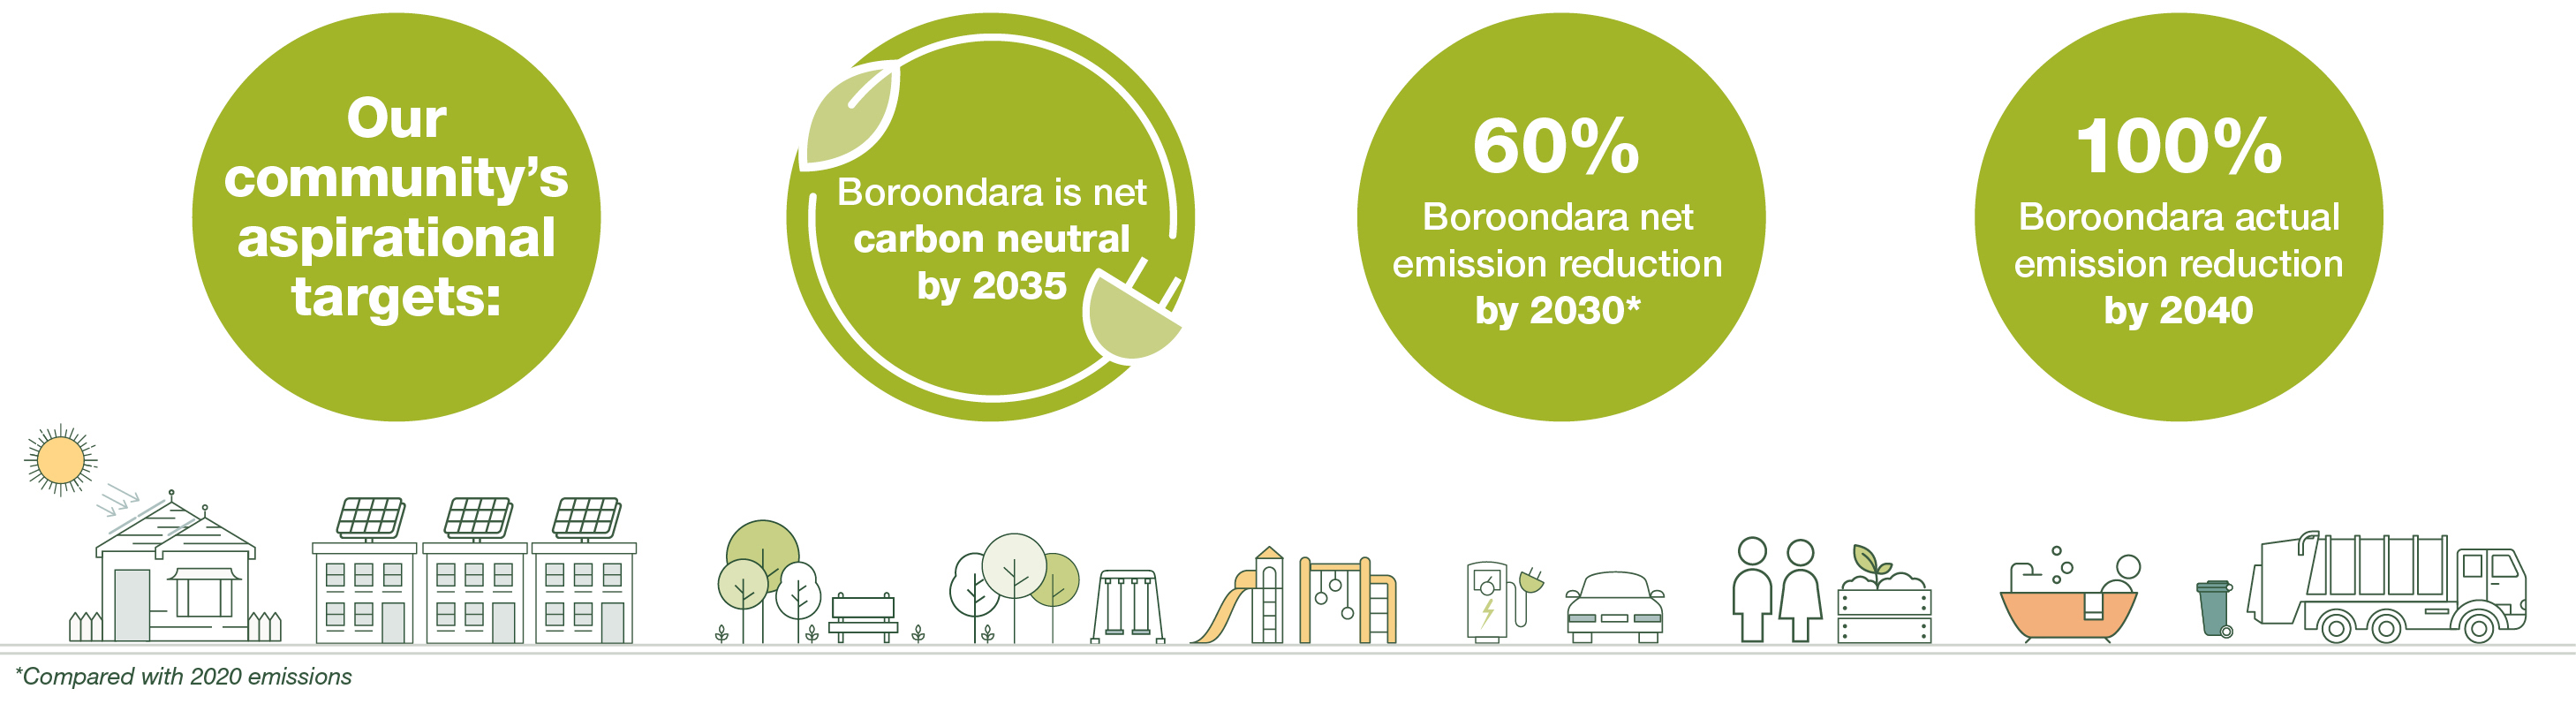 Streetscape illustration with our community's inspirational targets: Boroondara is net carbon neutral by 2035. 60% Boroondara net emission reduction by 2030. 100% Boroondara actual emission reduction by 2040.